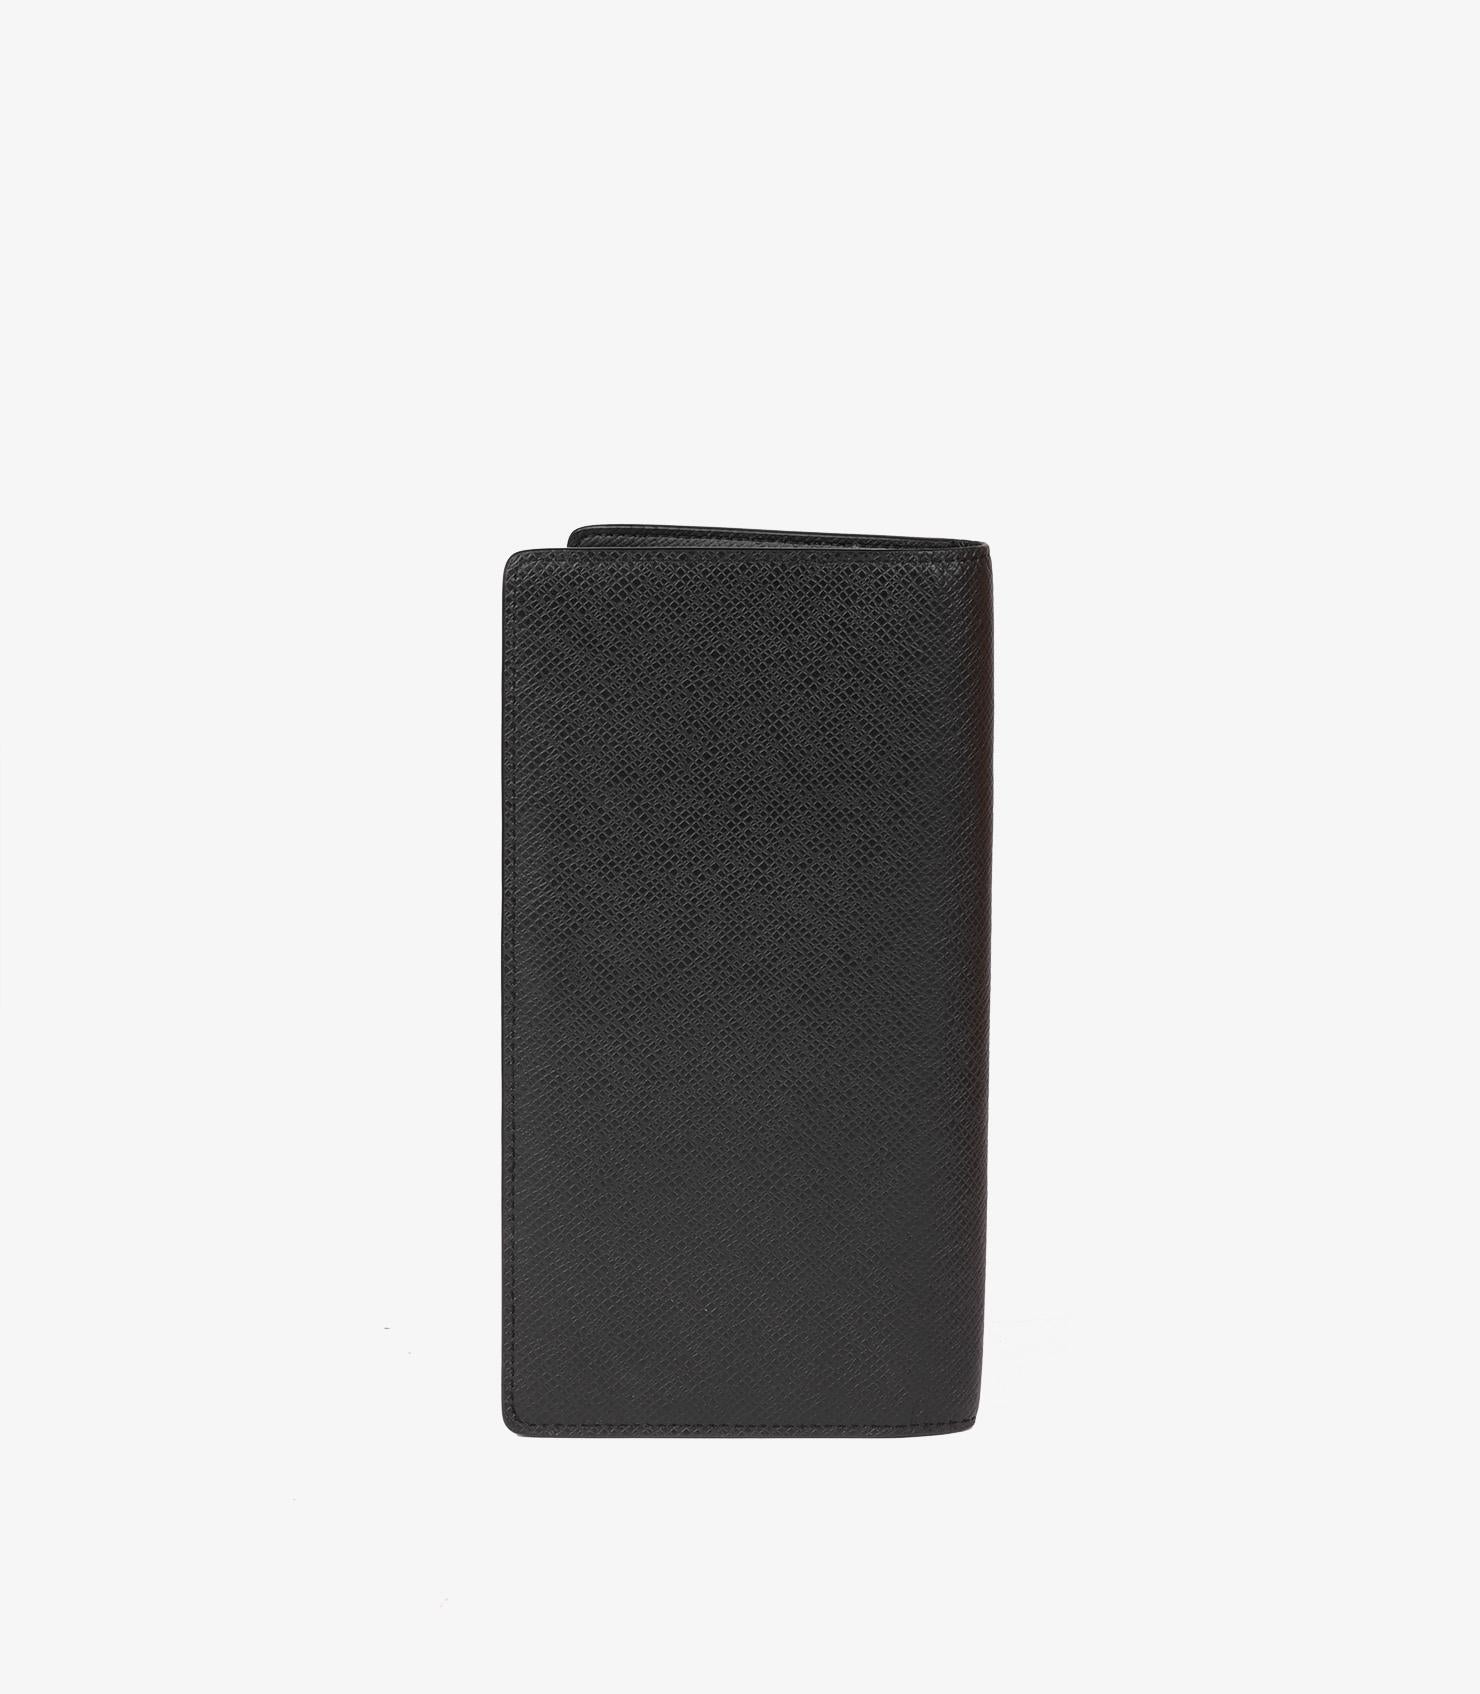 Louis Vuitton Black Taiga Leather Brazza Wallet

Brand- Louis Vuitton
Model- Brazza Wallet
Product Type- Wallet
Accompanied By- Louis Vuitton Box, Dust Bag, Ribbon, Bag
Colour- Black
Hardware- Silver
Material(s)- Taiga Leather
Authenticity Details-